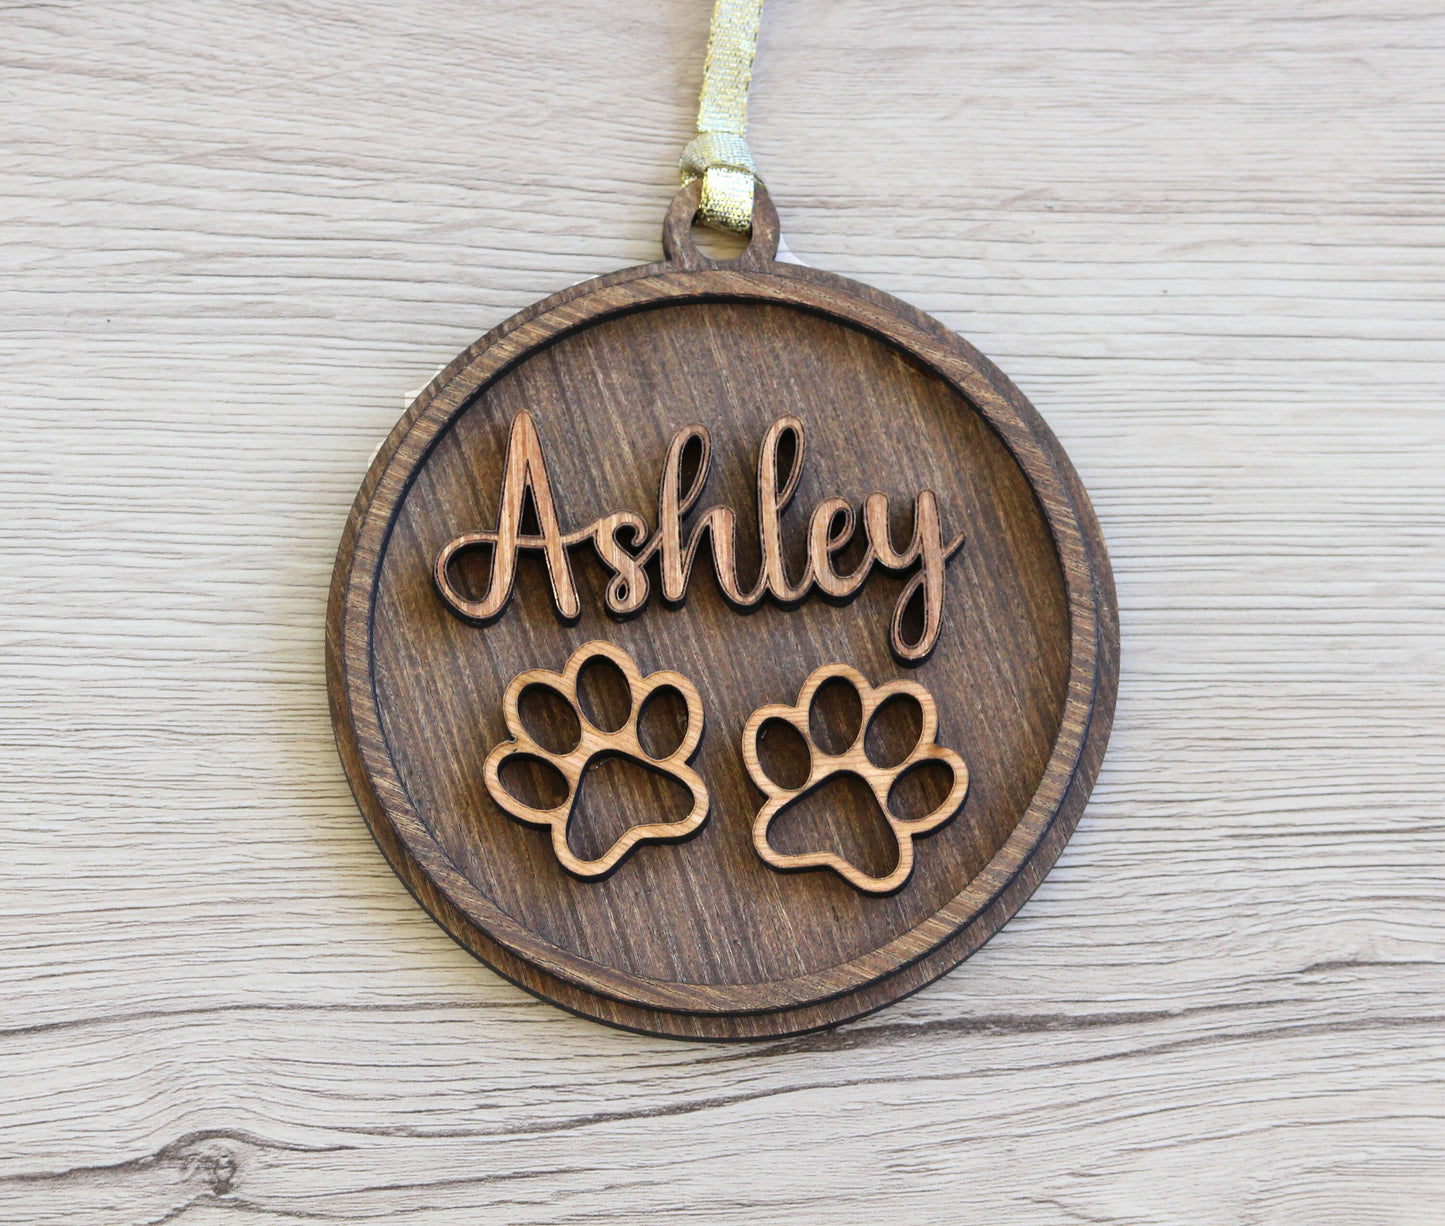 Personalized Wooden Ornament, Name Christmas Tree Ornament, Custom Wood Ornament